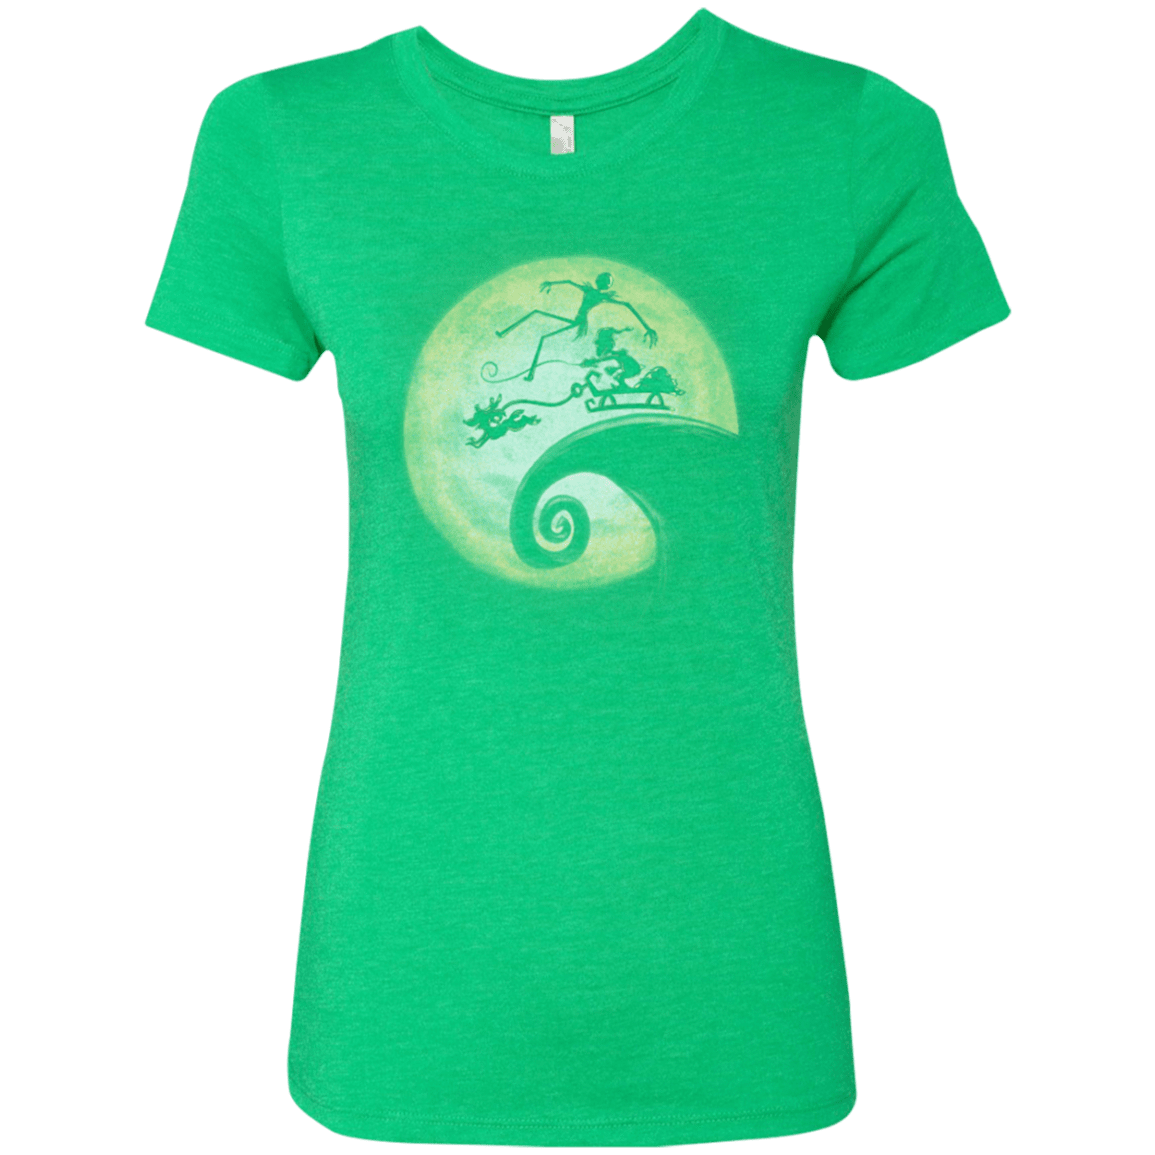 T-Shirts Envy / Small The Nightmare Before Grinchmas Women's Triblend T-Shirt